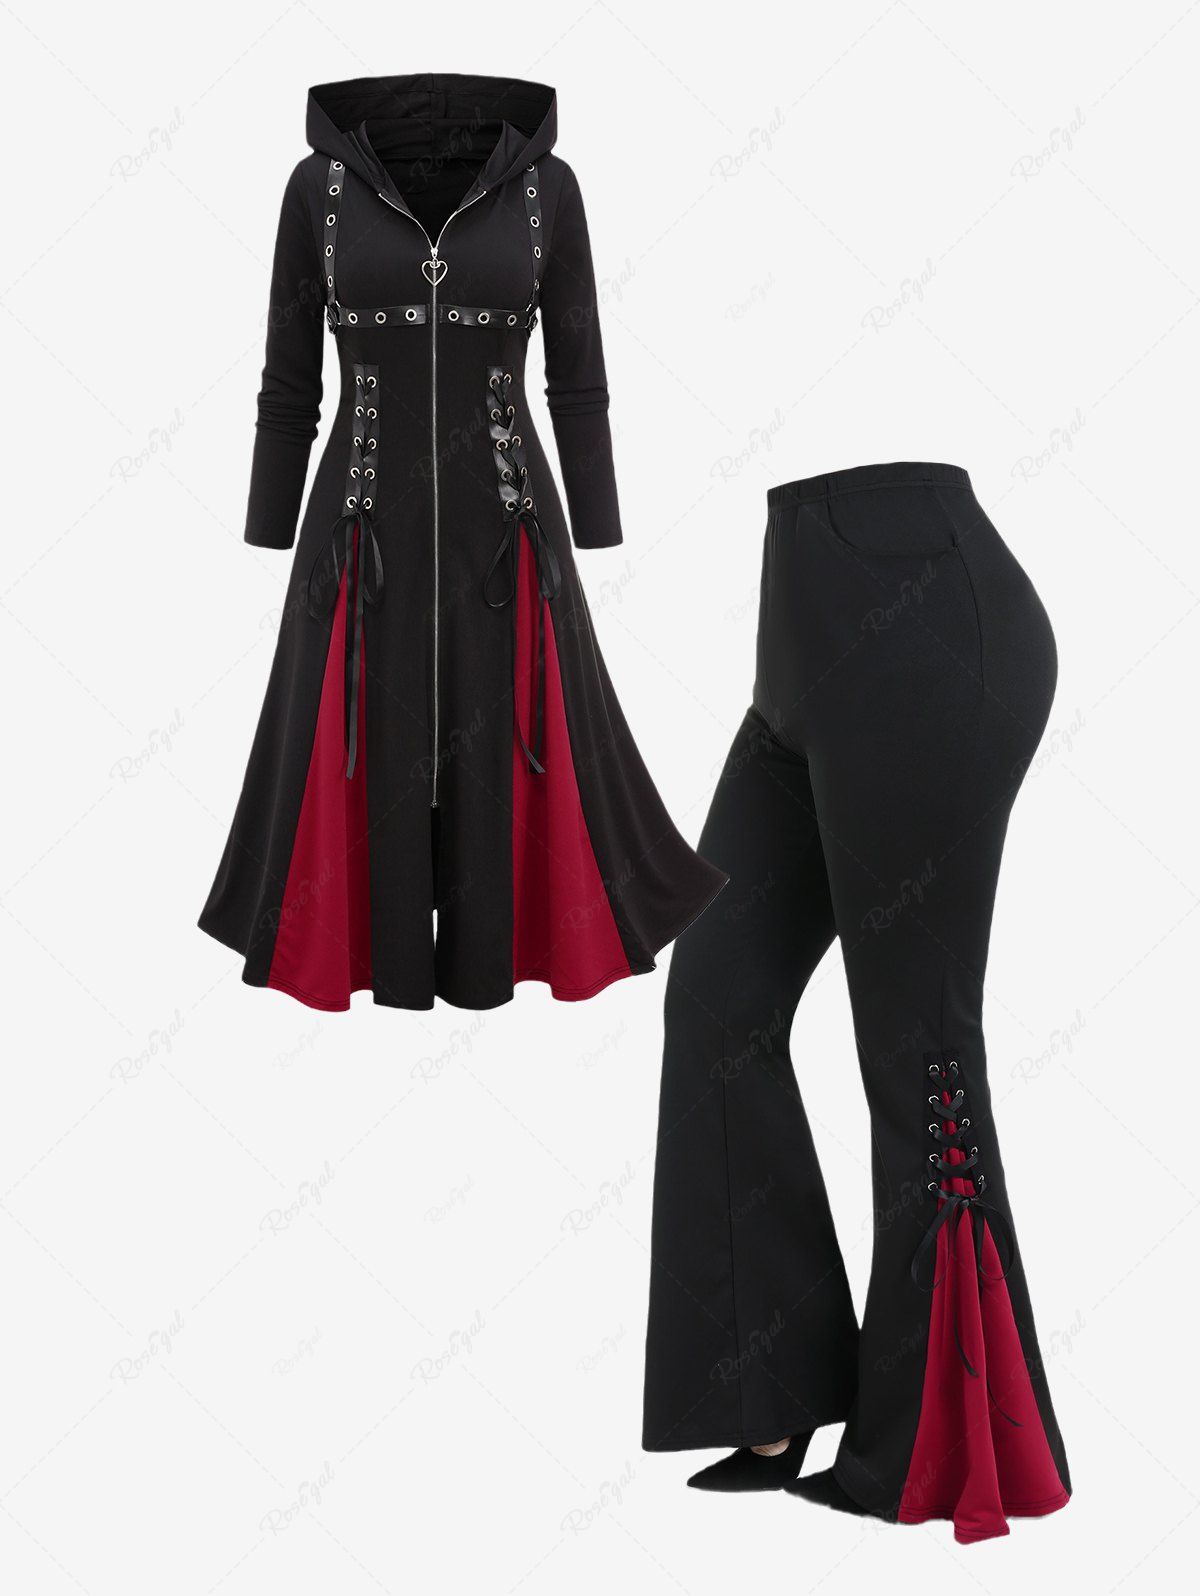 Online Plus Size Zipper Lace Up Grommets PU Leather Stripe Hooded Coat and Gothic Lace Up Contrast Godet Hem Flare Pants Outfit  